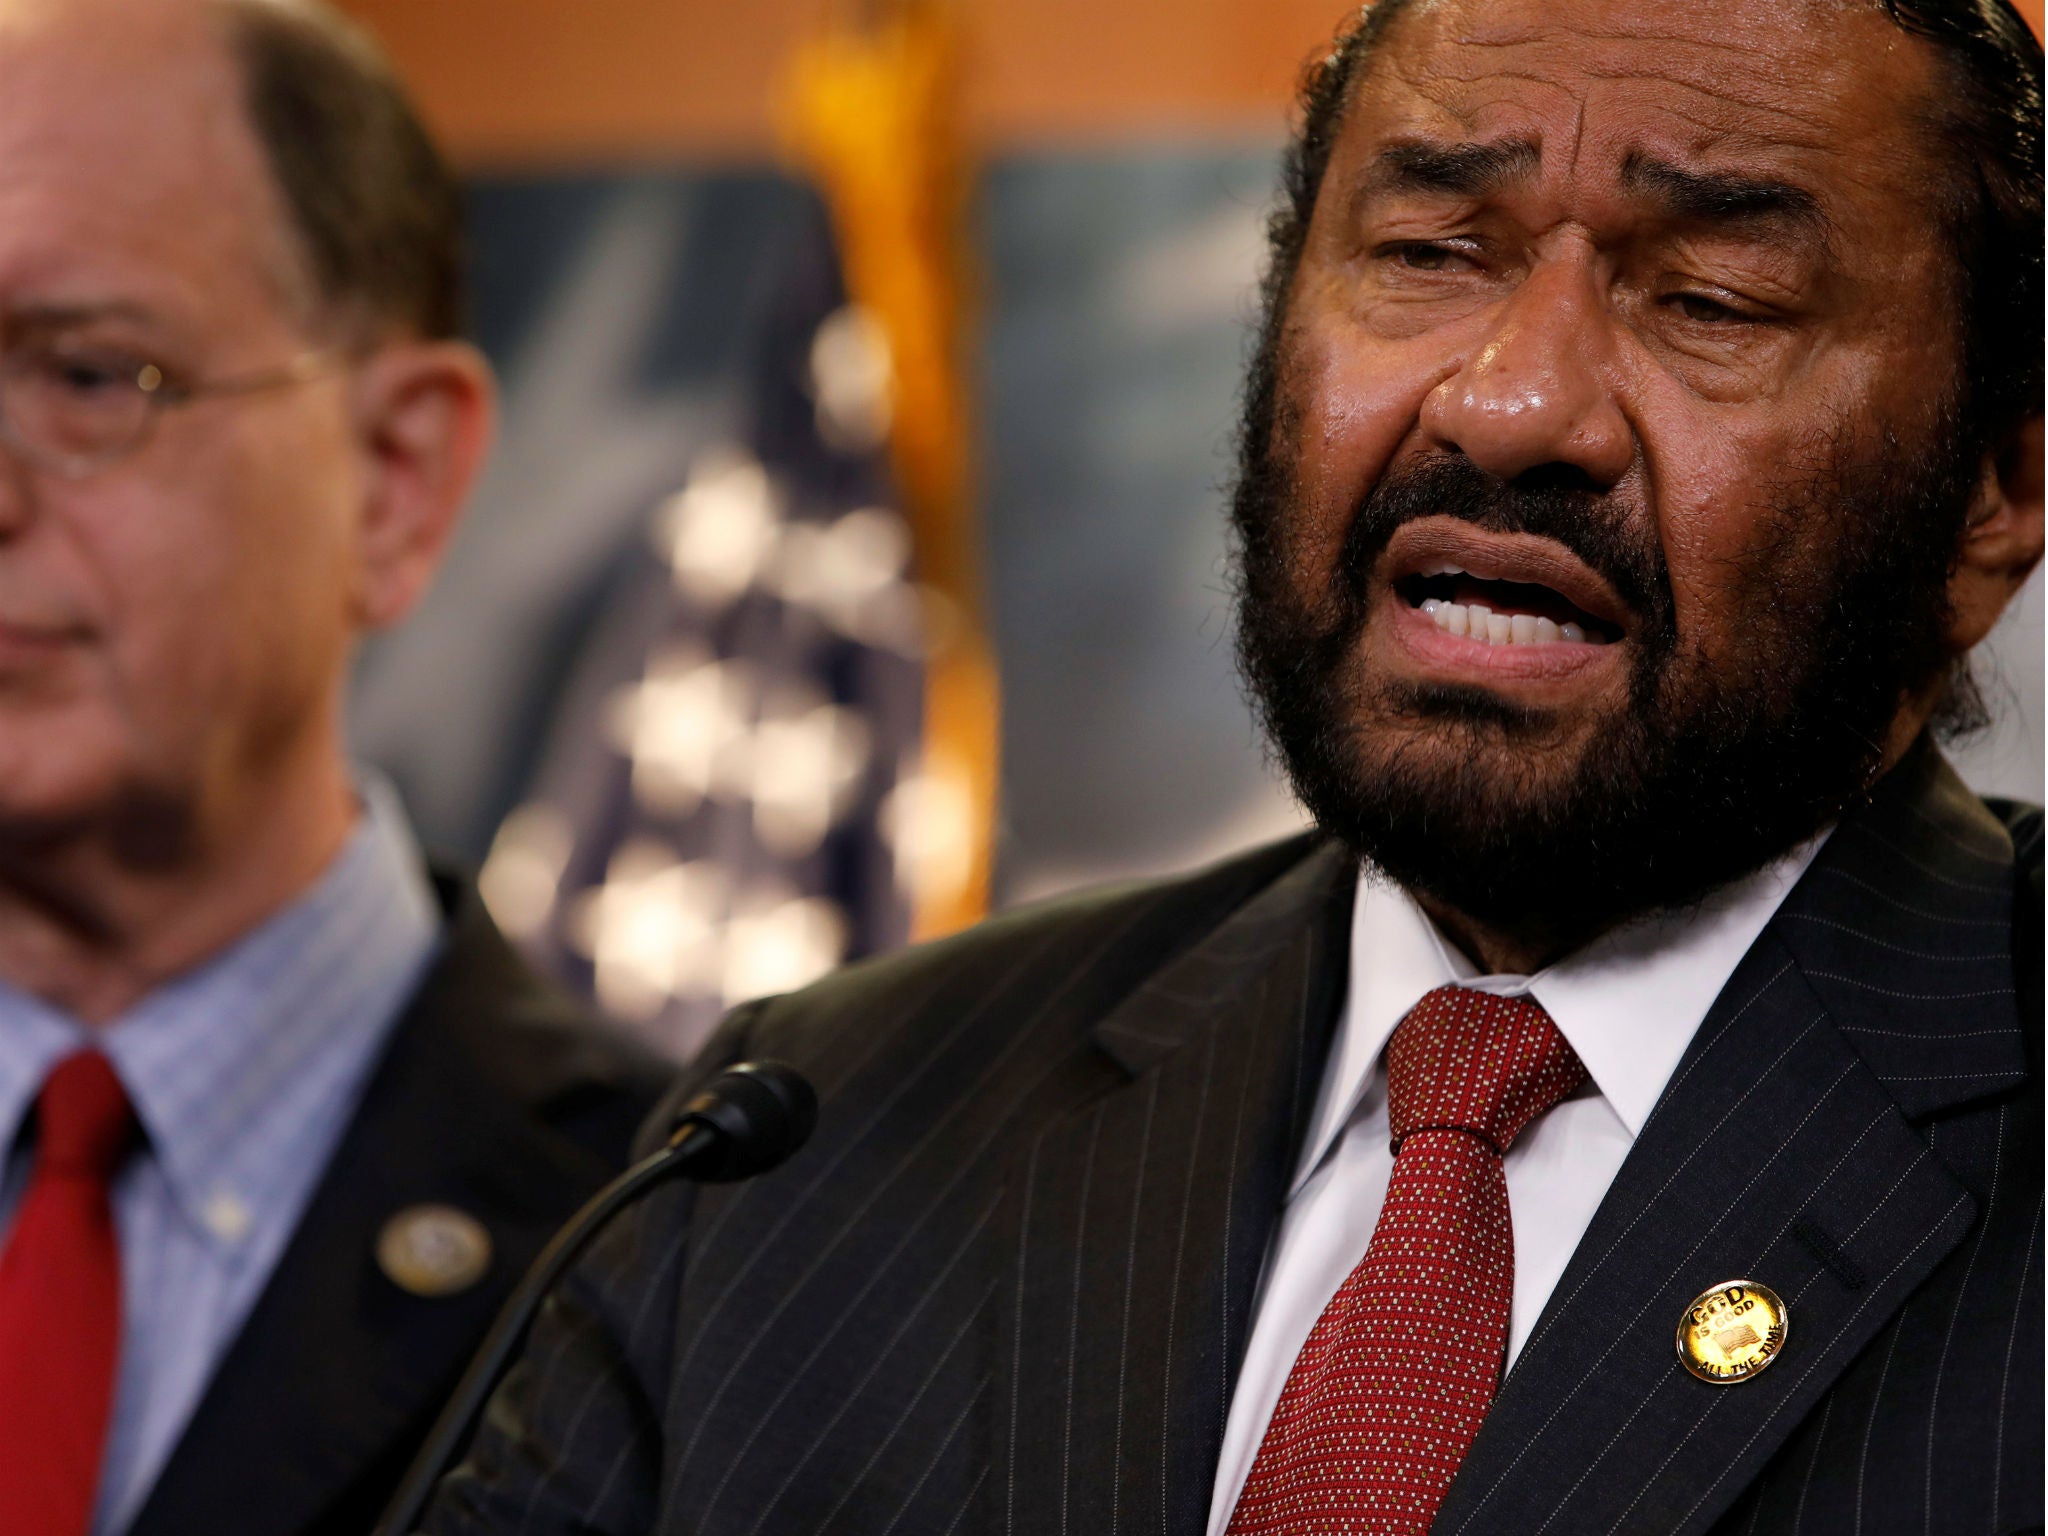 Al Green and Brad Sherman talk about plans draft articles of impeachment against Donald Trump in Washington, D.C. on June 7, 2017